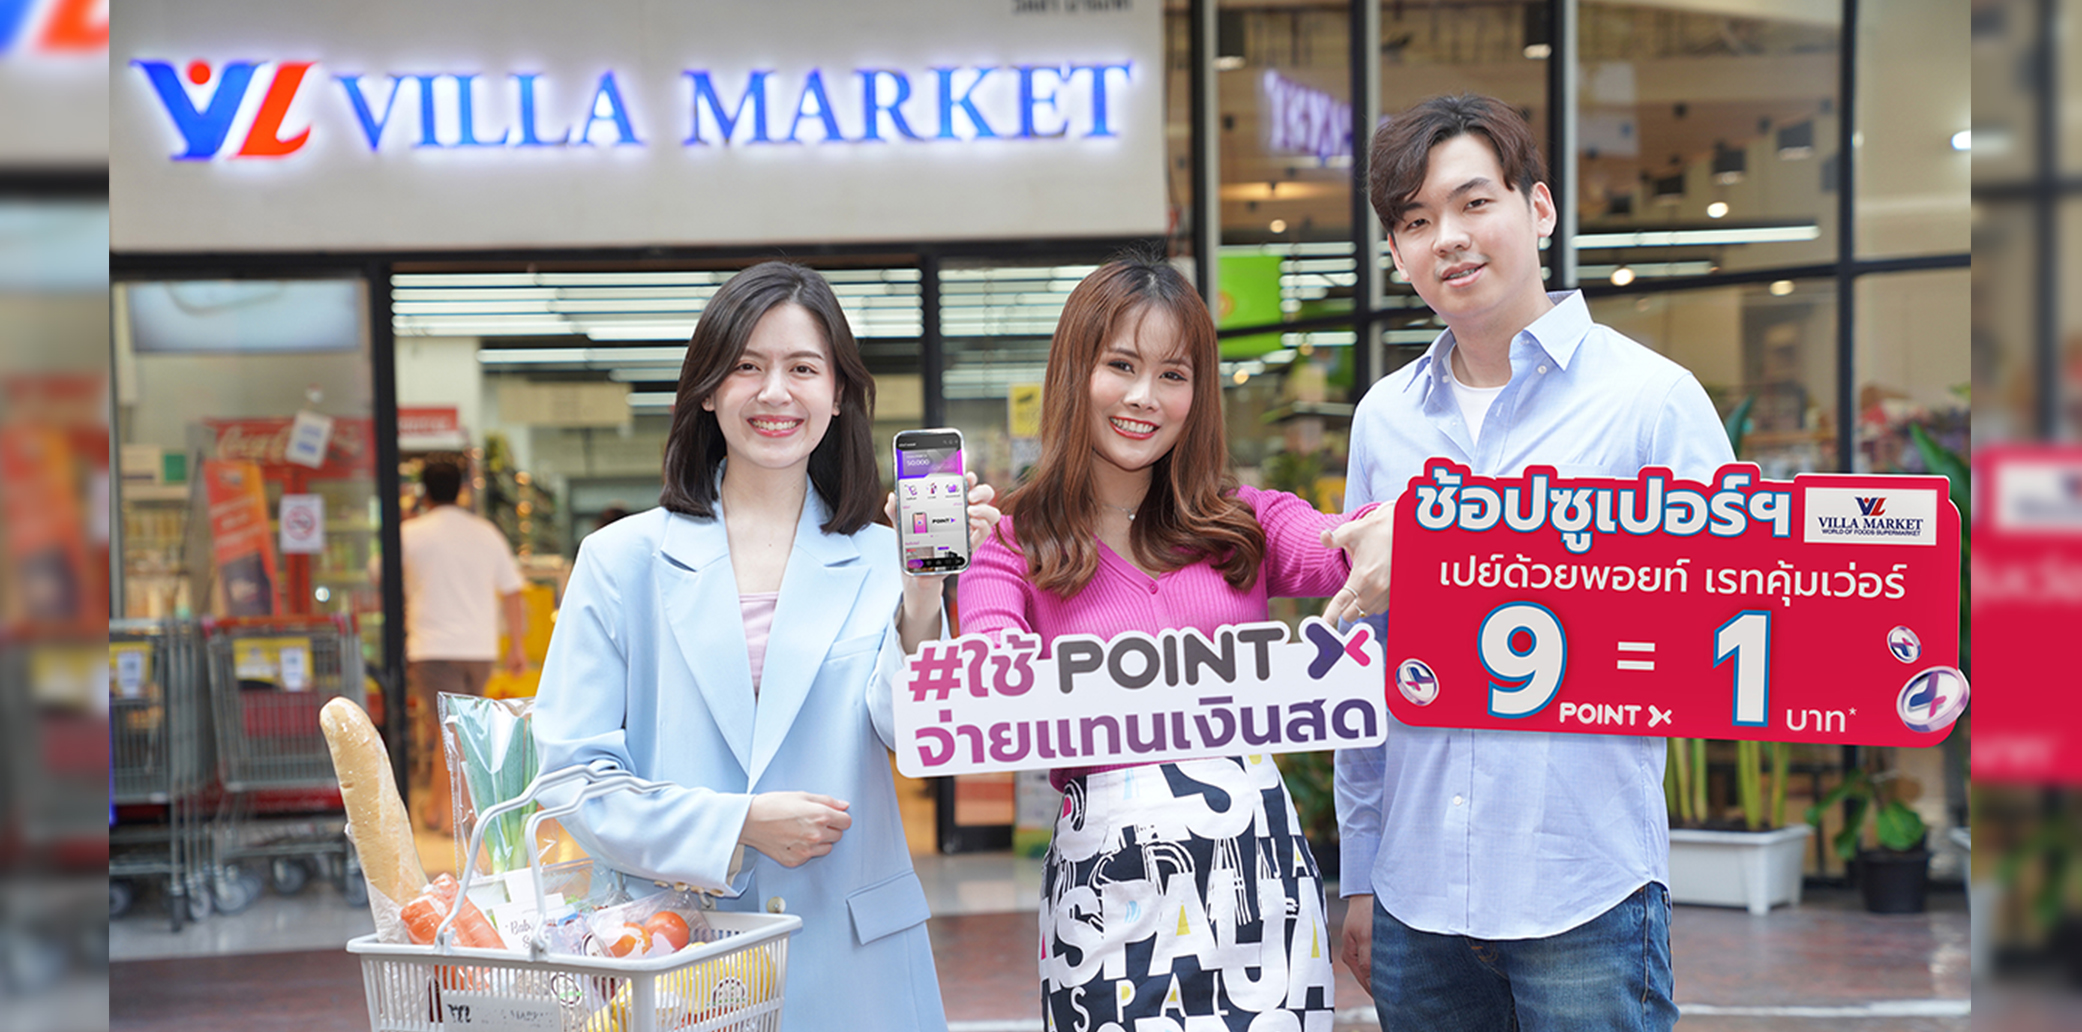 Enjoy grocery shopping with PointX every day  by spending points as cash at a special rate 9 PointX = 1 baht at Villa Market